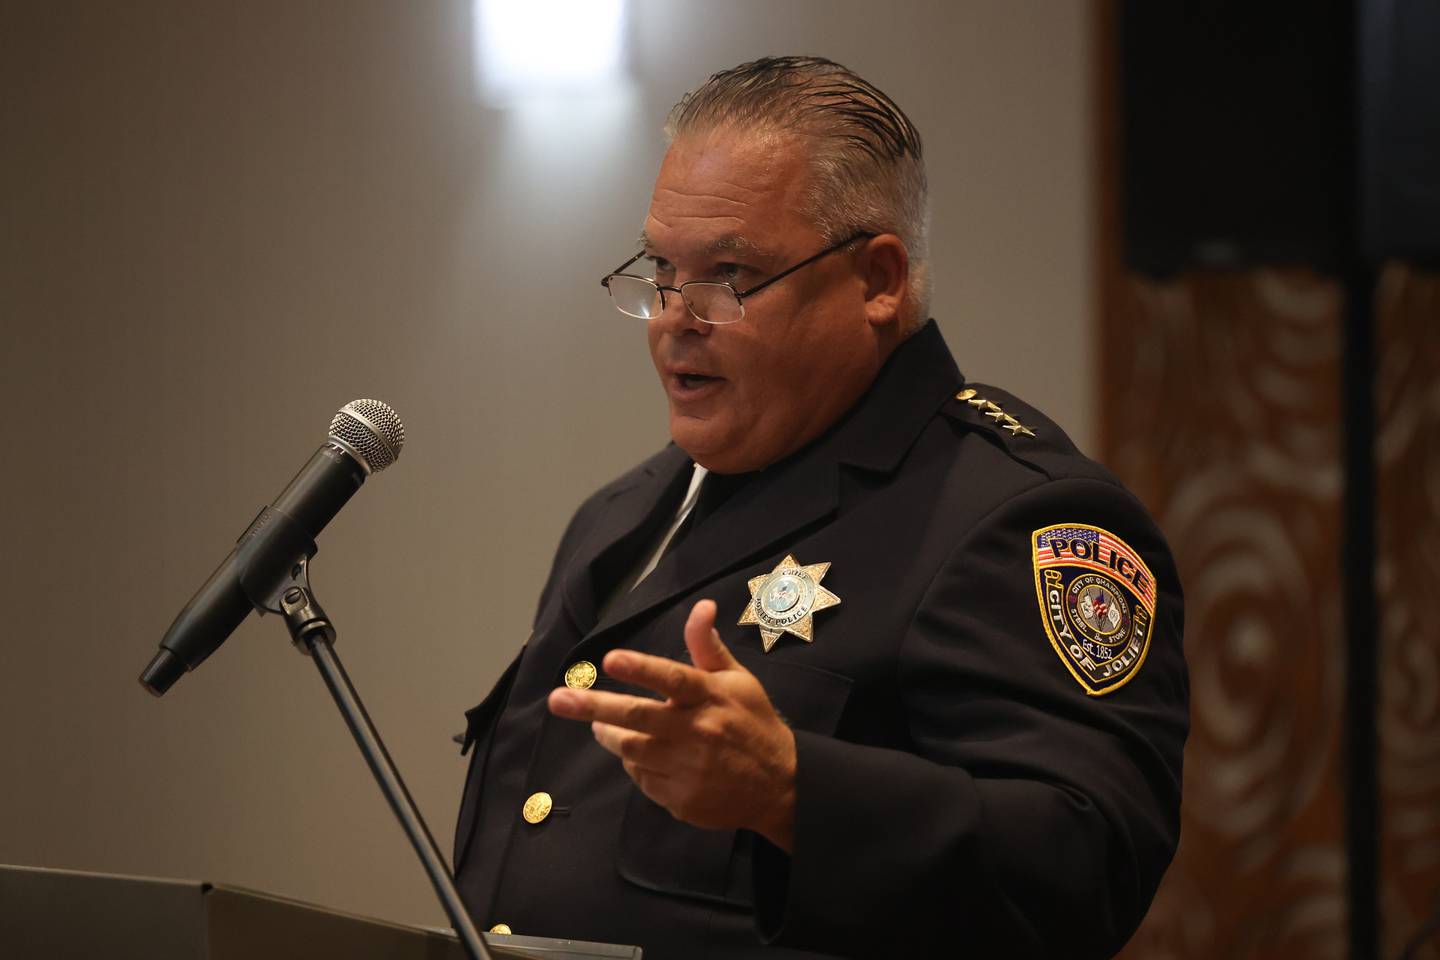 Joliet Police Chief William Evans speaks at a Chamber of Commerce luncheon at Holiday Inn in Joliet. Wednesday, July 27, 2022 in Joliet.